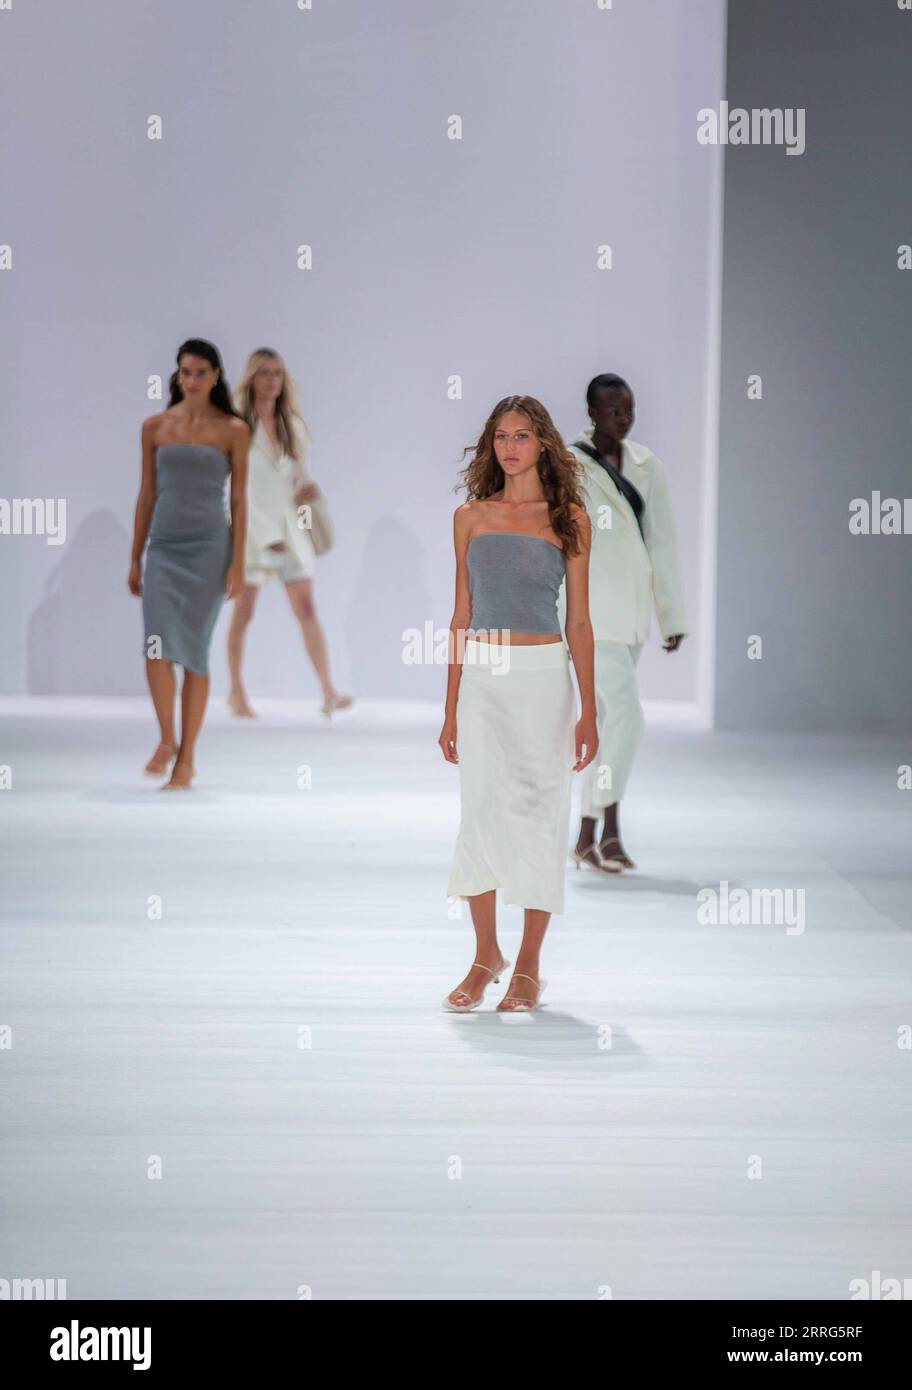 220510 -- SYDNEY, May 10, 2022 -- Models walk on catwalk during the Afterpay Australian Fashion Week AAFW in Sydney, Australia, on May 10, 2022. The AAFW kicked off on Monday with an array of local brands showcasing their resort collections in Sydney. Photo by /Xinhua AUSTRALIA-SYDNEY-FASHION WEEK HuxJingchen PUBLICATIONxNOTxINxCHN Stock Photo